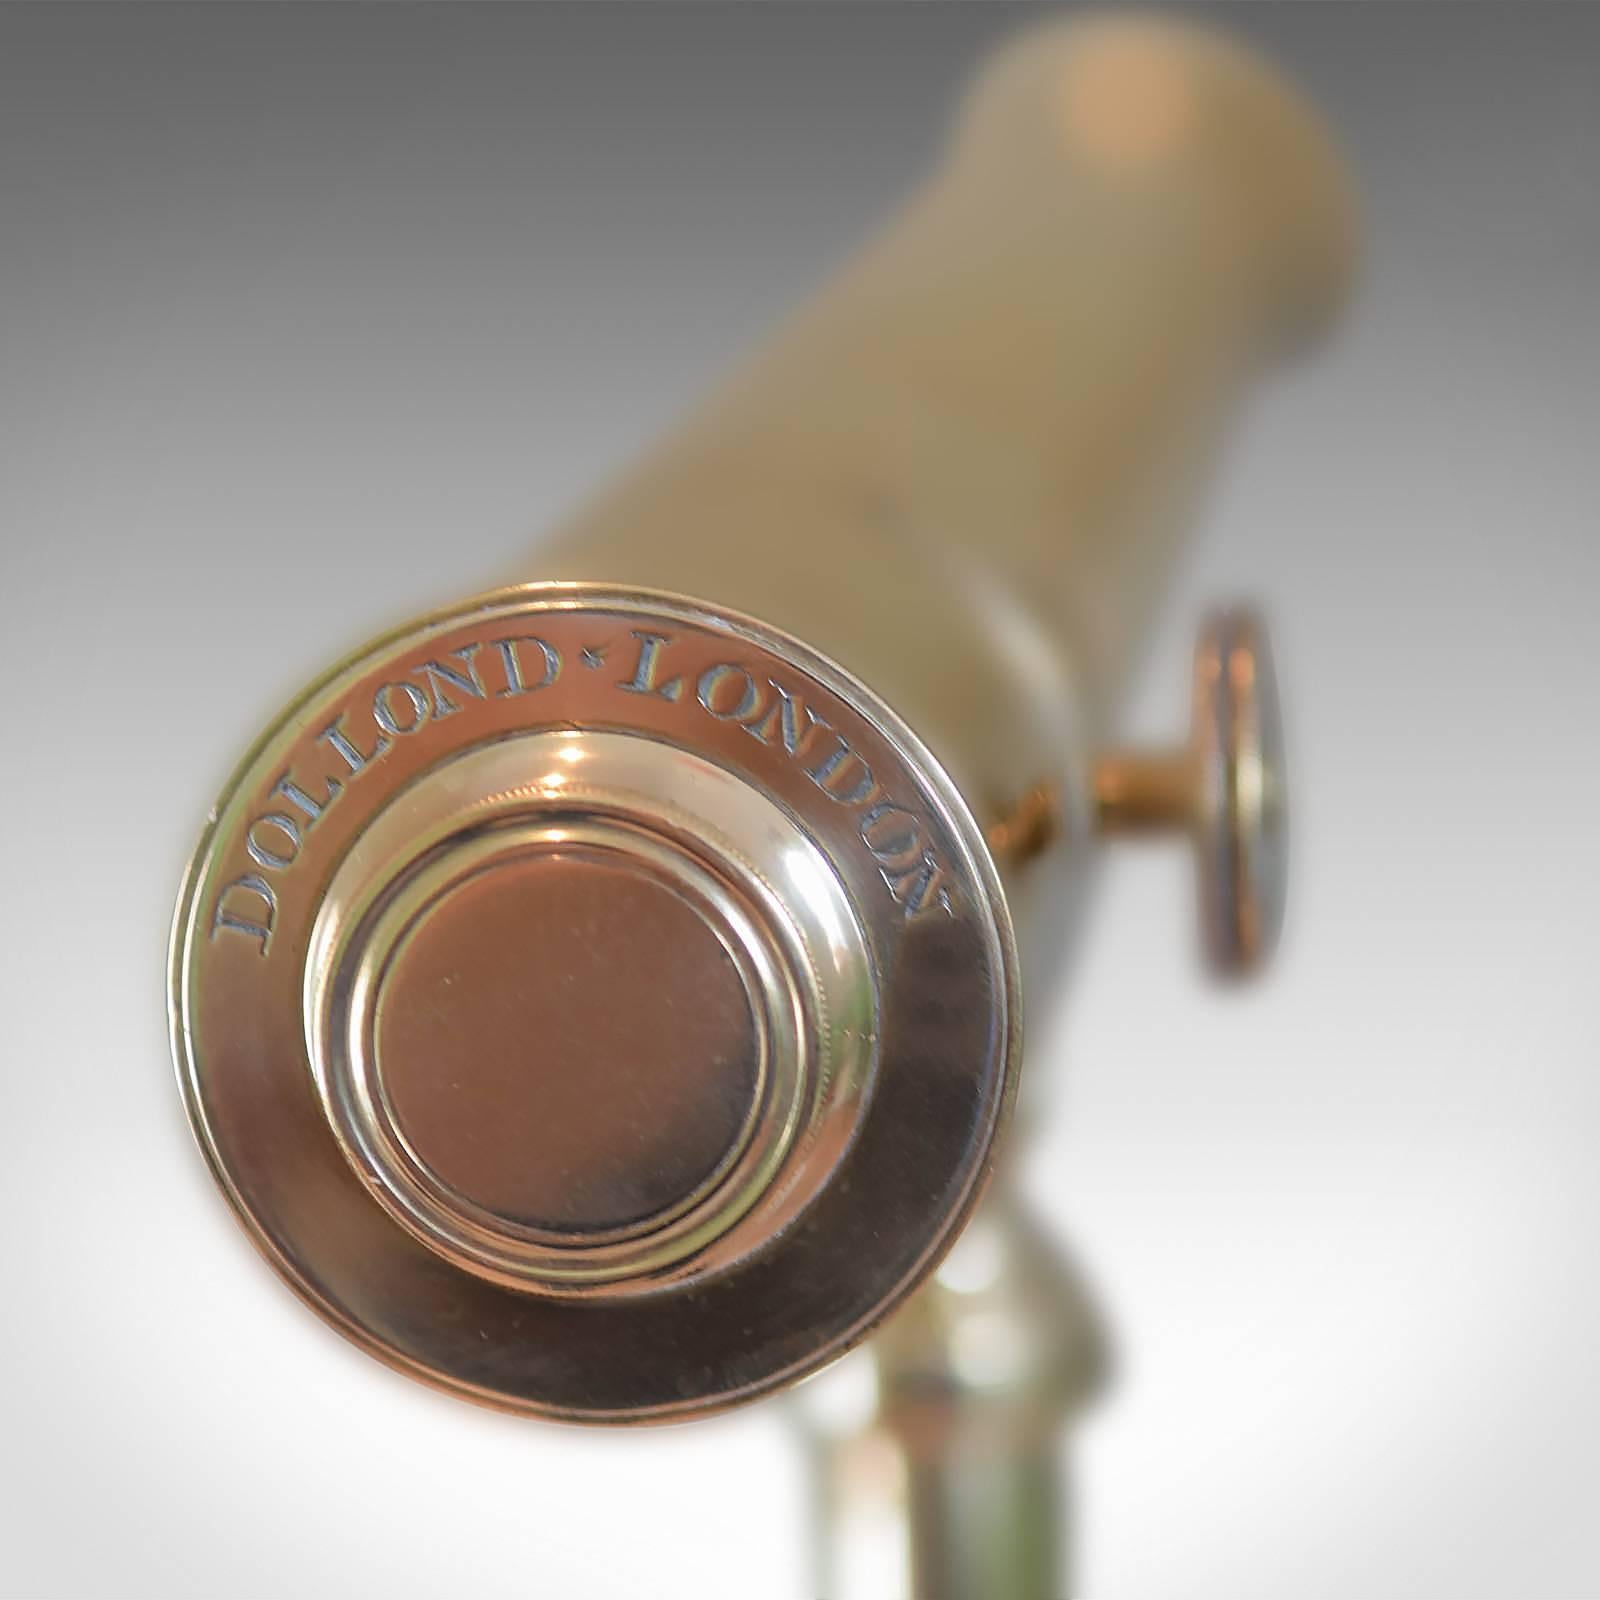 18th Century Antique Telescope, Dollond, Refracting Library Scope in Mahogany Case circa 1800